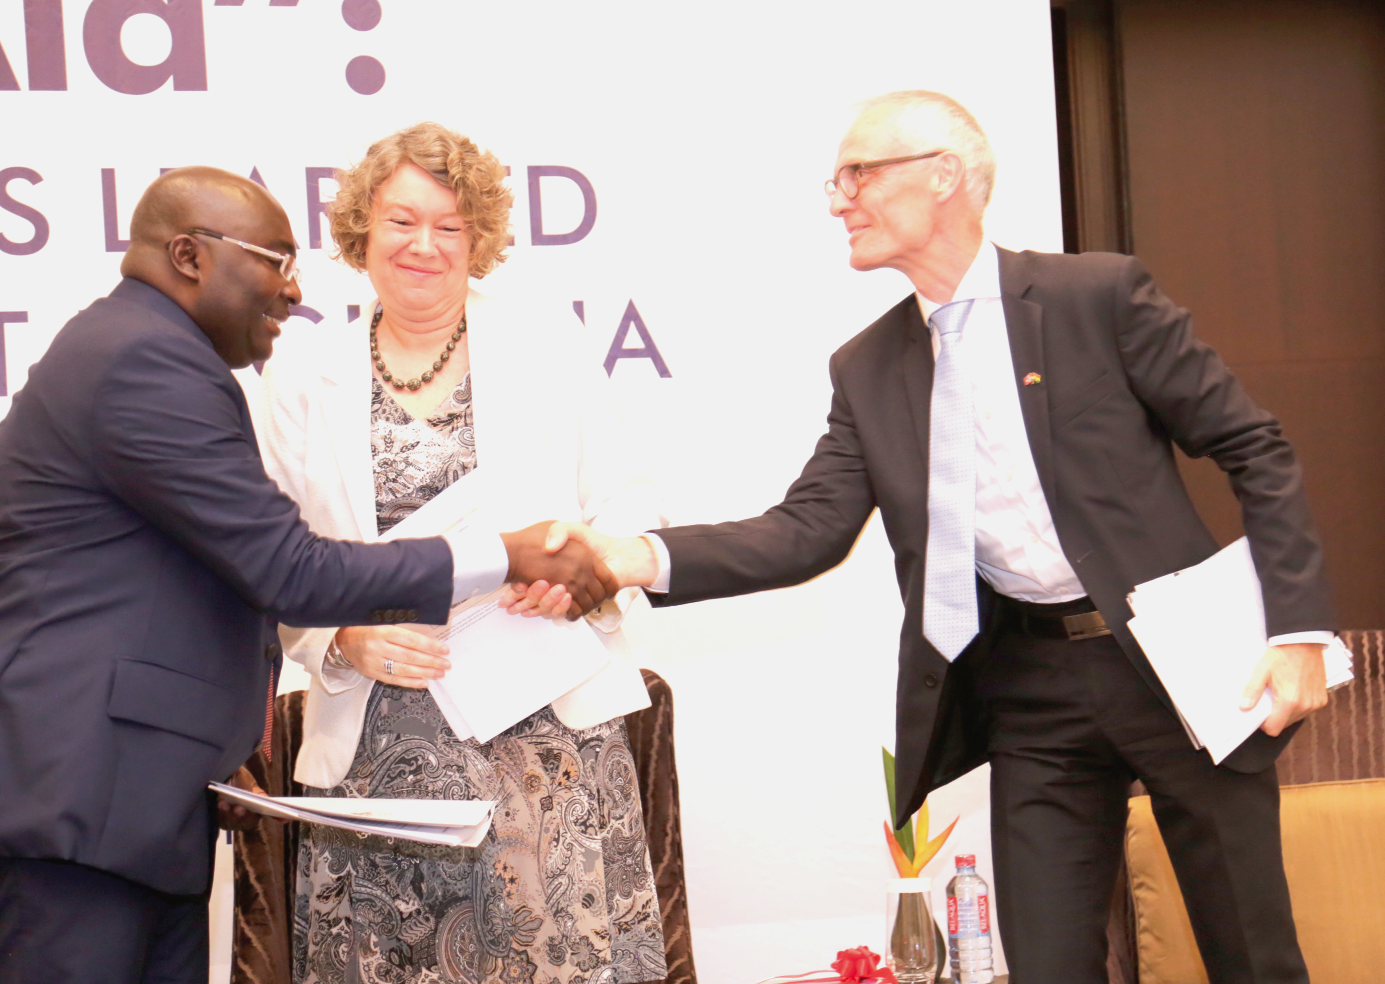 The Vice-President, Dr Mahamudu Bawumia (left), exchanging pleasantries with Mr Gunnar Andreas Holm (right), the Ambassador of Norway, and Mrs Tove Degnbol, the Ambassador of Denmark.